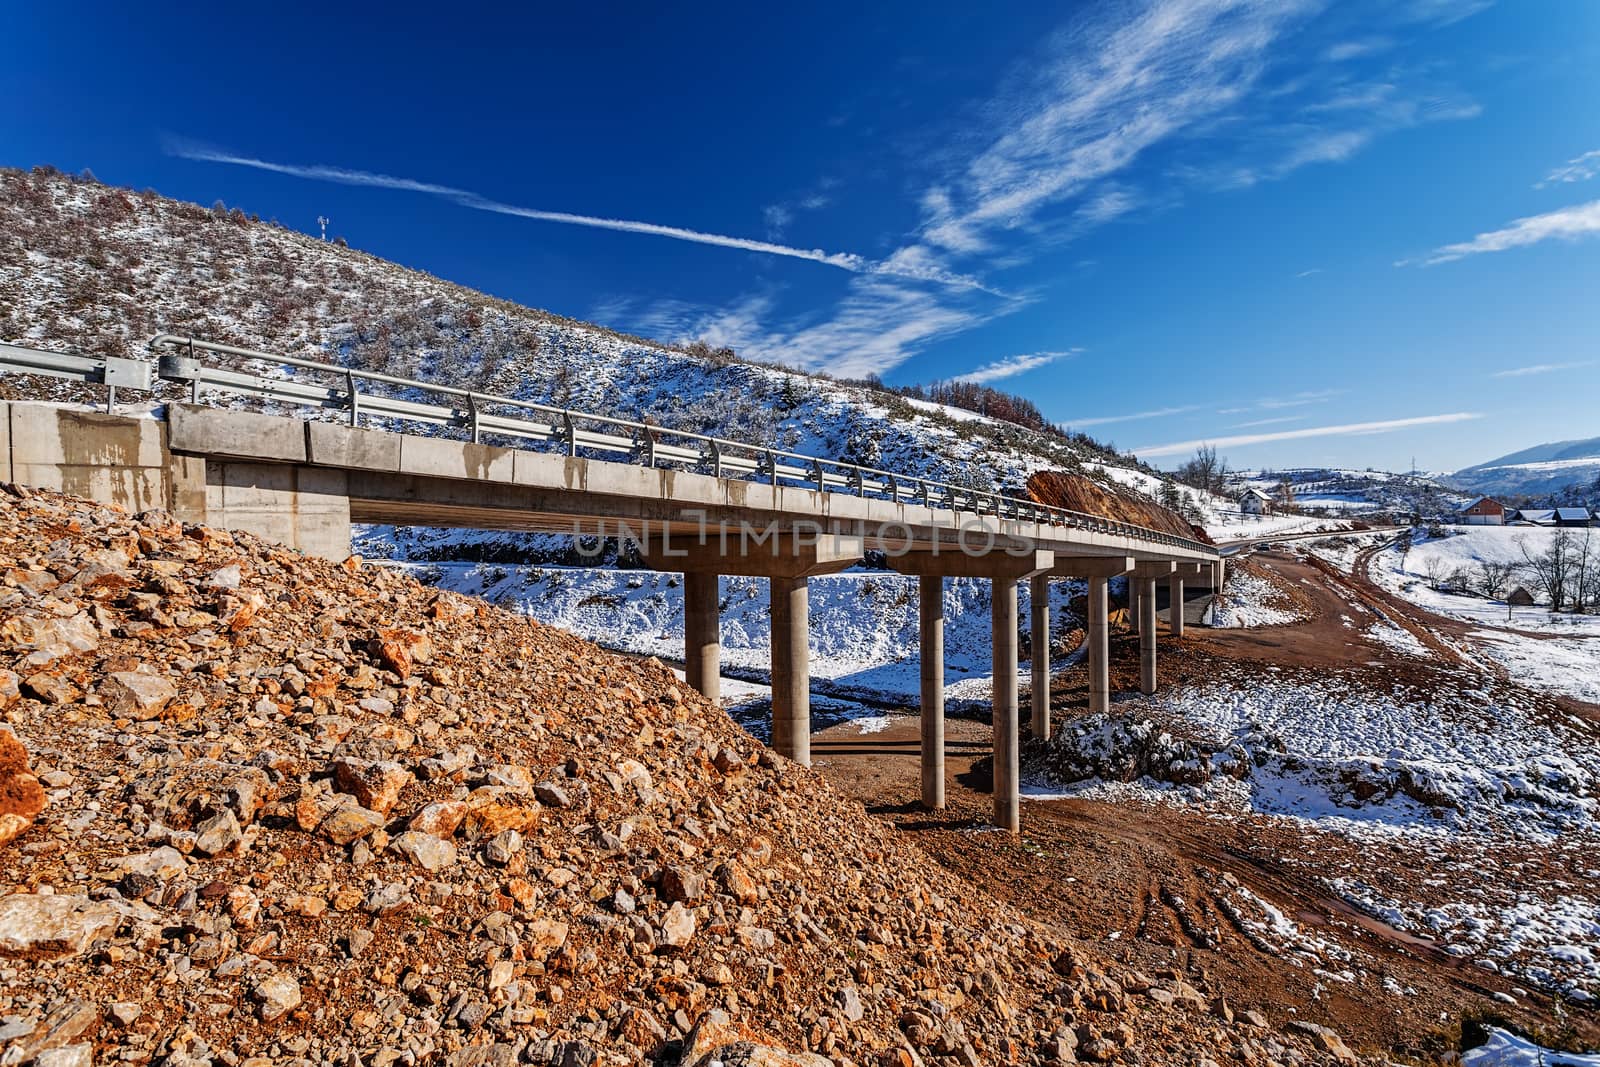 Mountain bridge in winter with snow and blue sky by vladimirnenezic